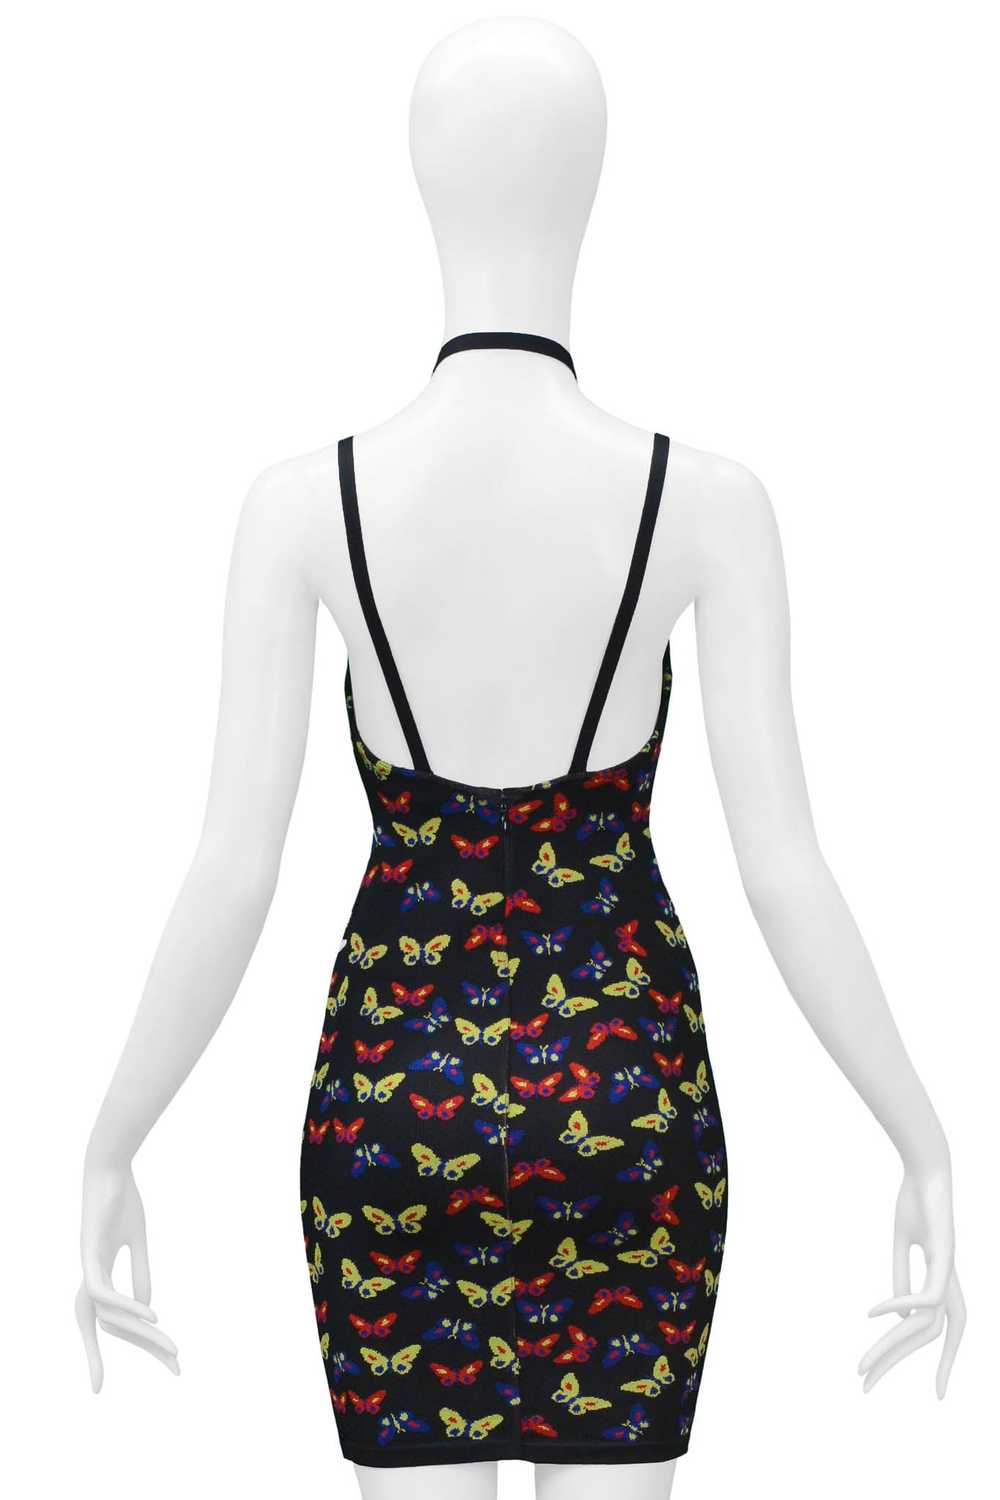 ALAIA ICONIC BUTTERFLY PRINT KNIT DRESS 1991 - image 2